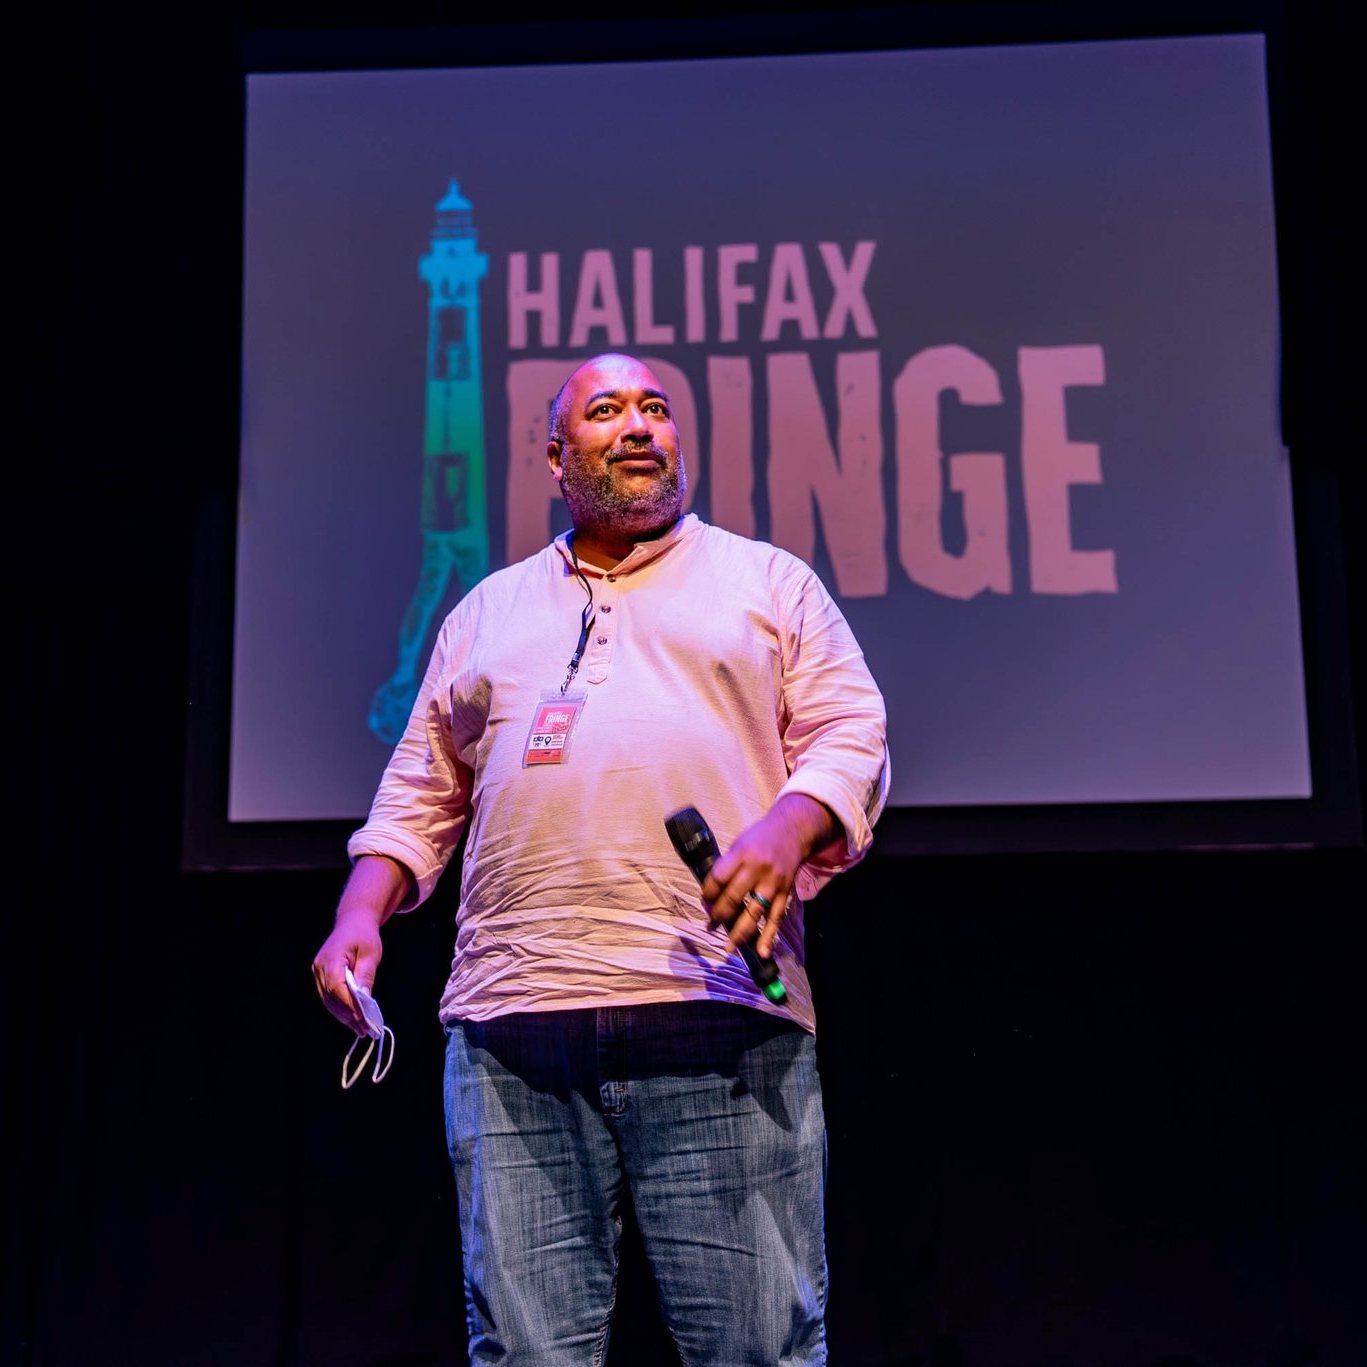 The Velvet Duke stands in front of the Halifax Fringe Festival logo projected on a screen. Velvet is a Black person wearing a light pink shirt and blue jeans. The logo has similar colours but this is surely just coincidence. Credit: Stoo Metz Photography